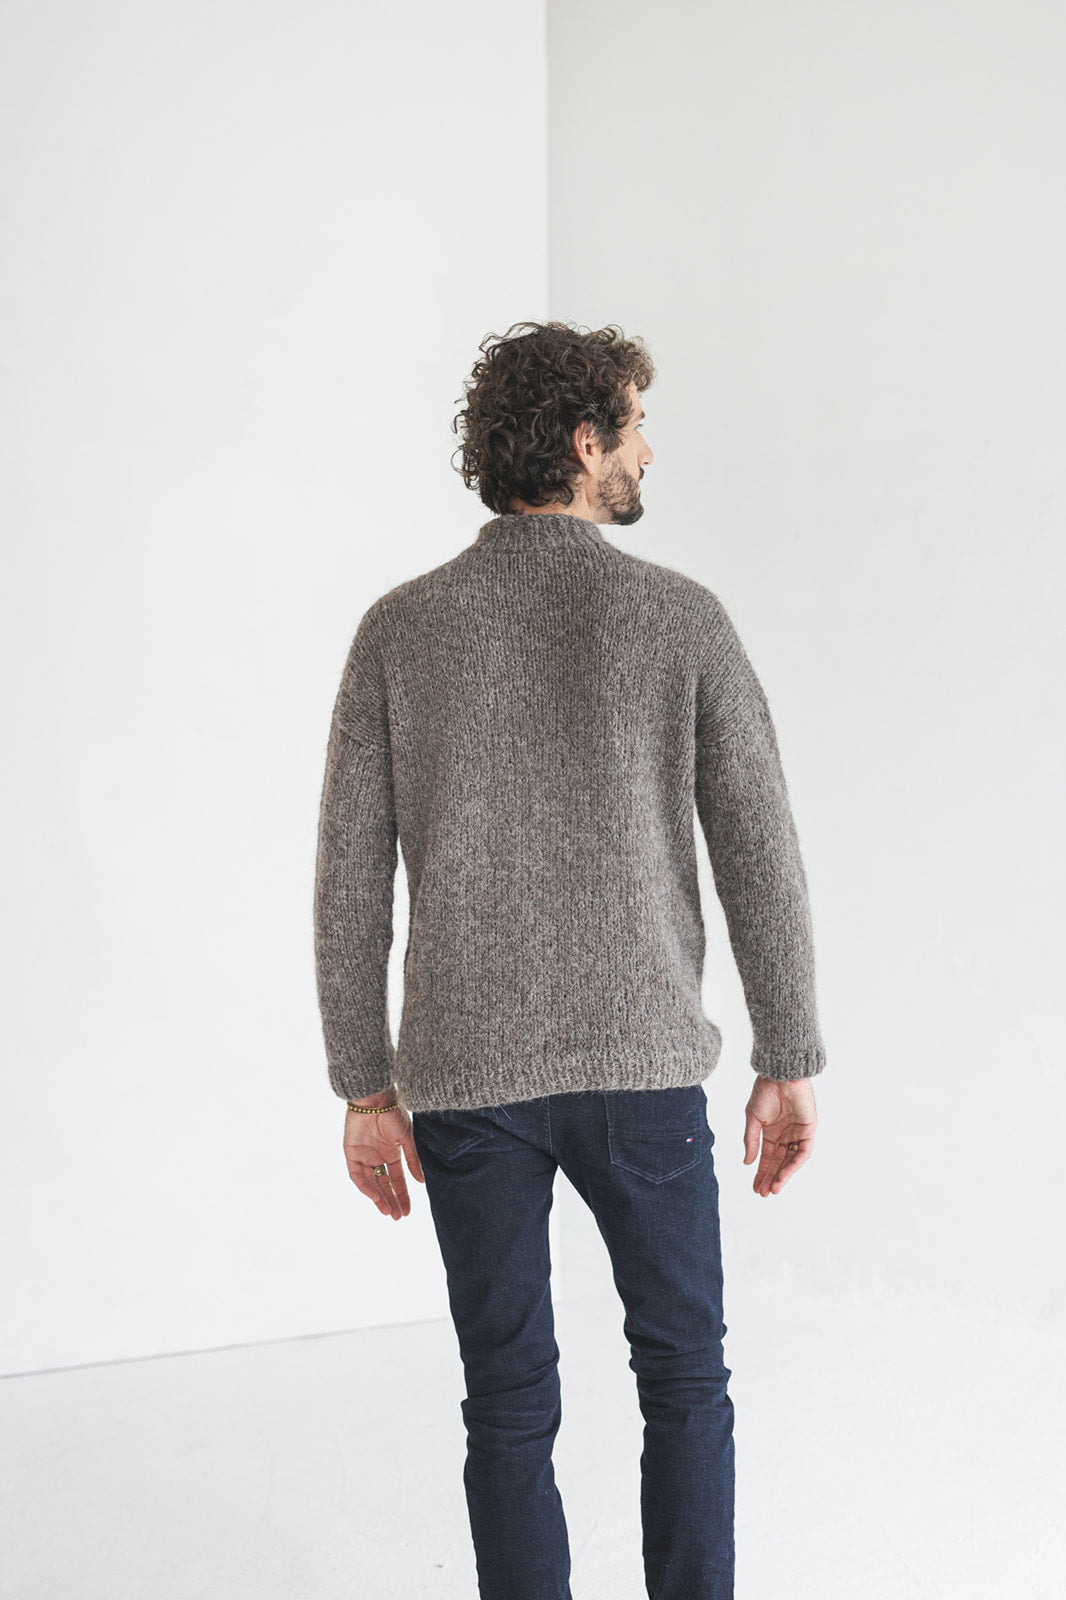 Men's knitted gray alpaca wool sweater, grey cable knit jumper for man, minimalist men pullover, gift for him, hand made thick winter pull